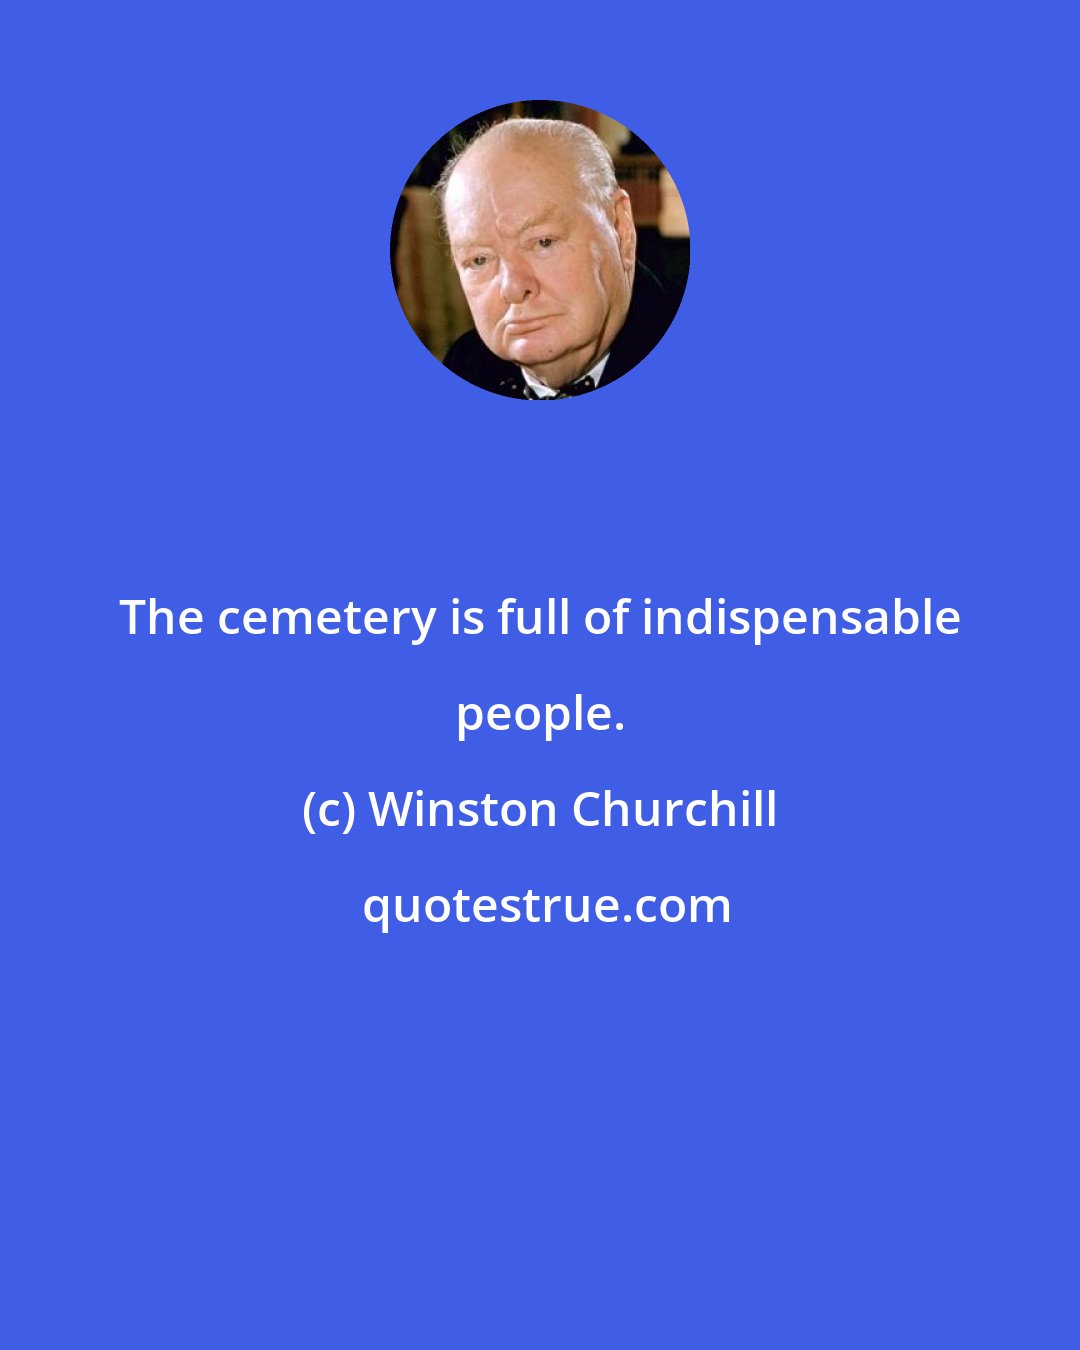 Winston Churchill: The cemetery is full of indispensable people.